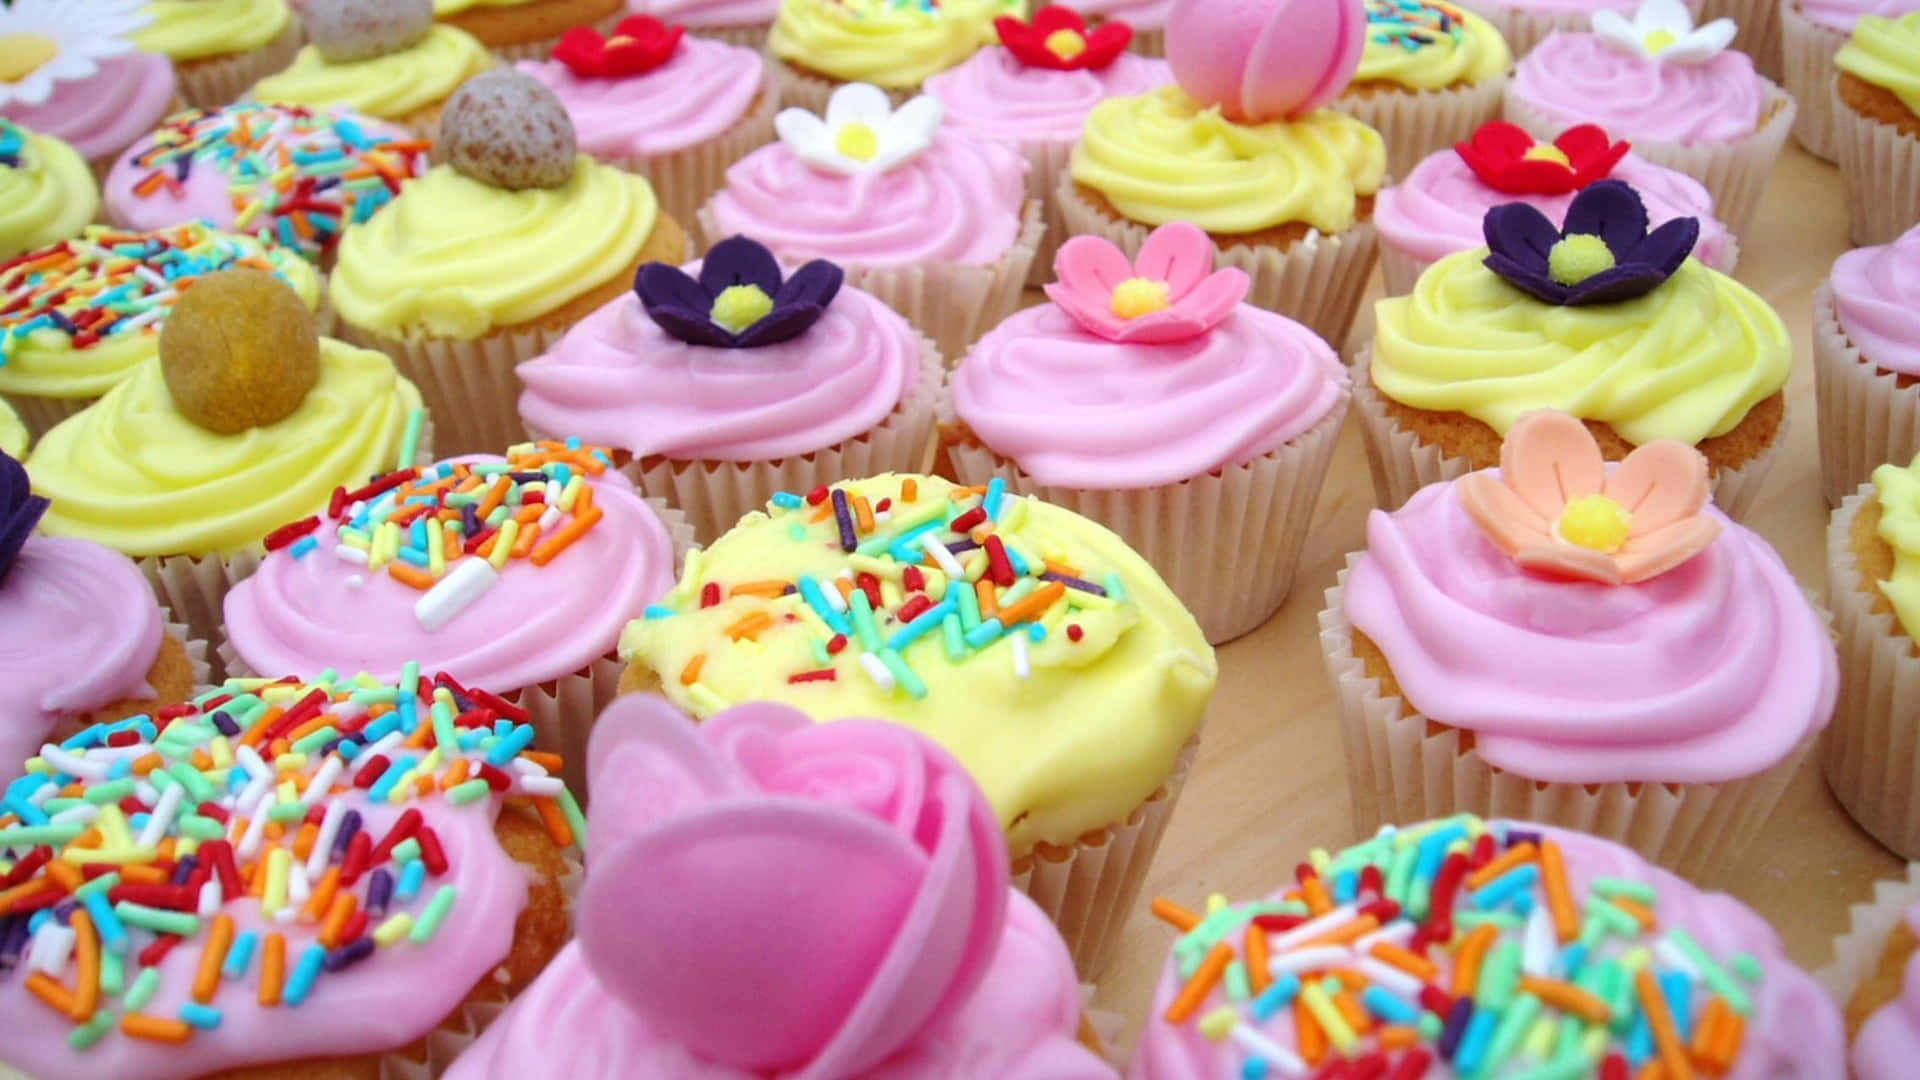 Yummy Cupcakes With Flowers And Sprinkles Wallpaper